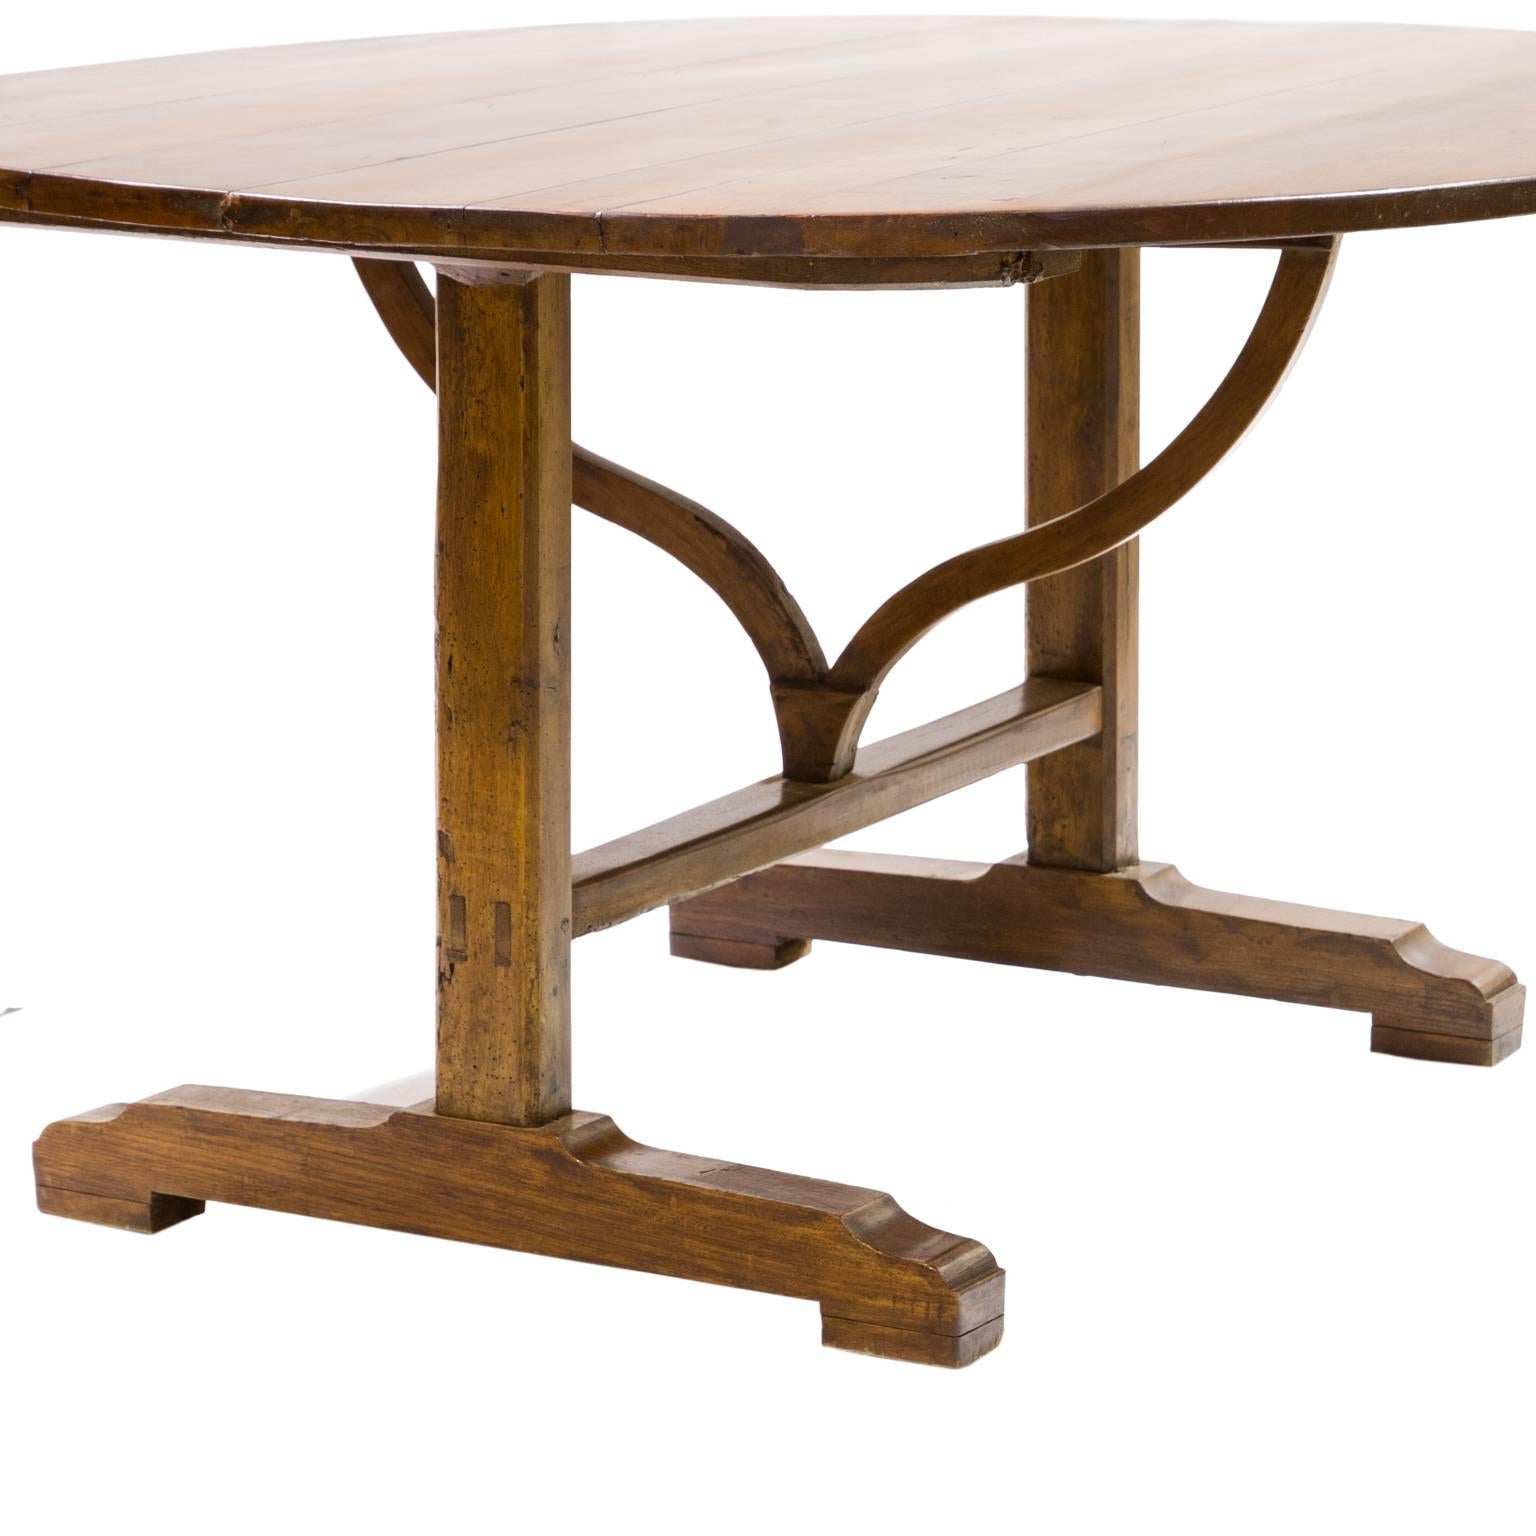 A fantastic oval wine tasting table with flip-top and turnstile support. Great color and patina. Very sturdy. This piece is french Provincial, made of cherrywood, planked top and size is large enough for a breakfast room, early 19th century.
    